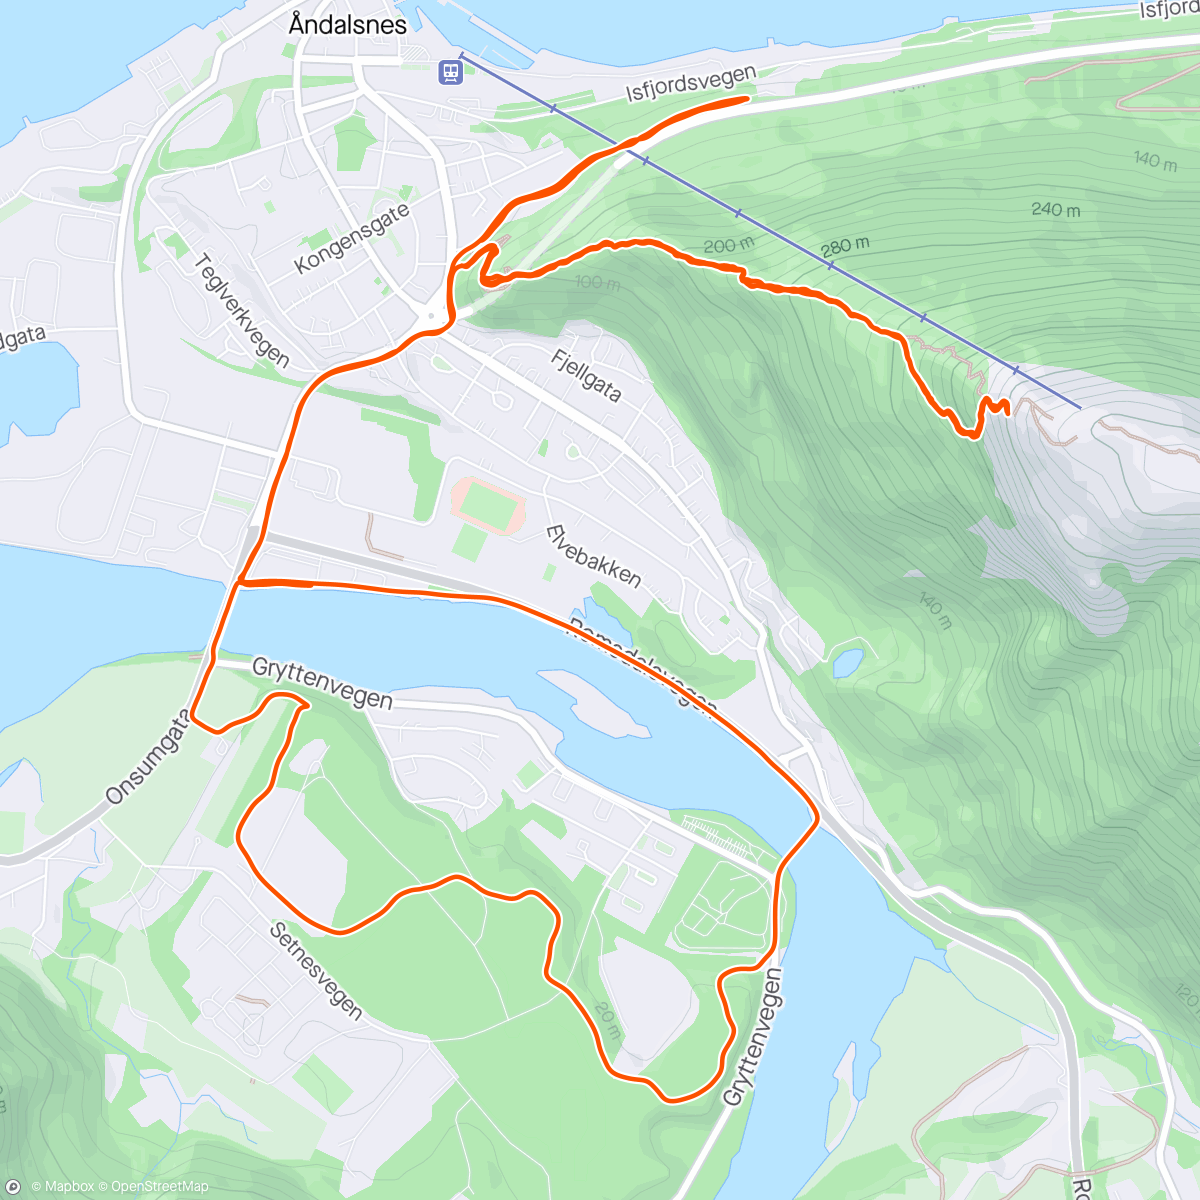 Map of the activity, 5*1K flat + 4*7min uphill + 15(
*(45/15)